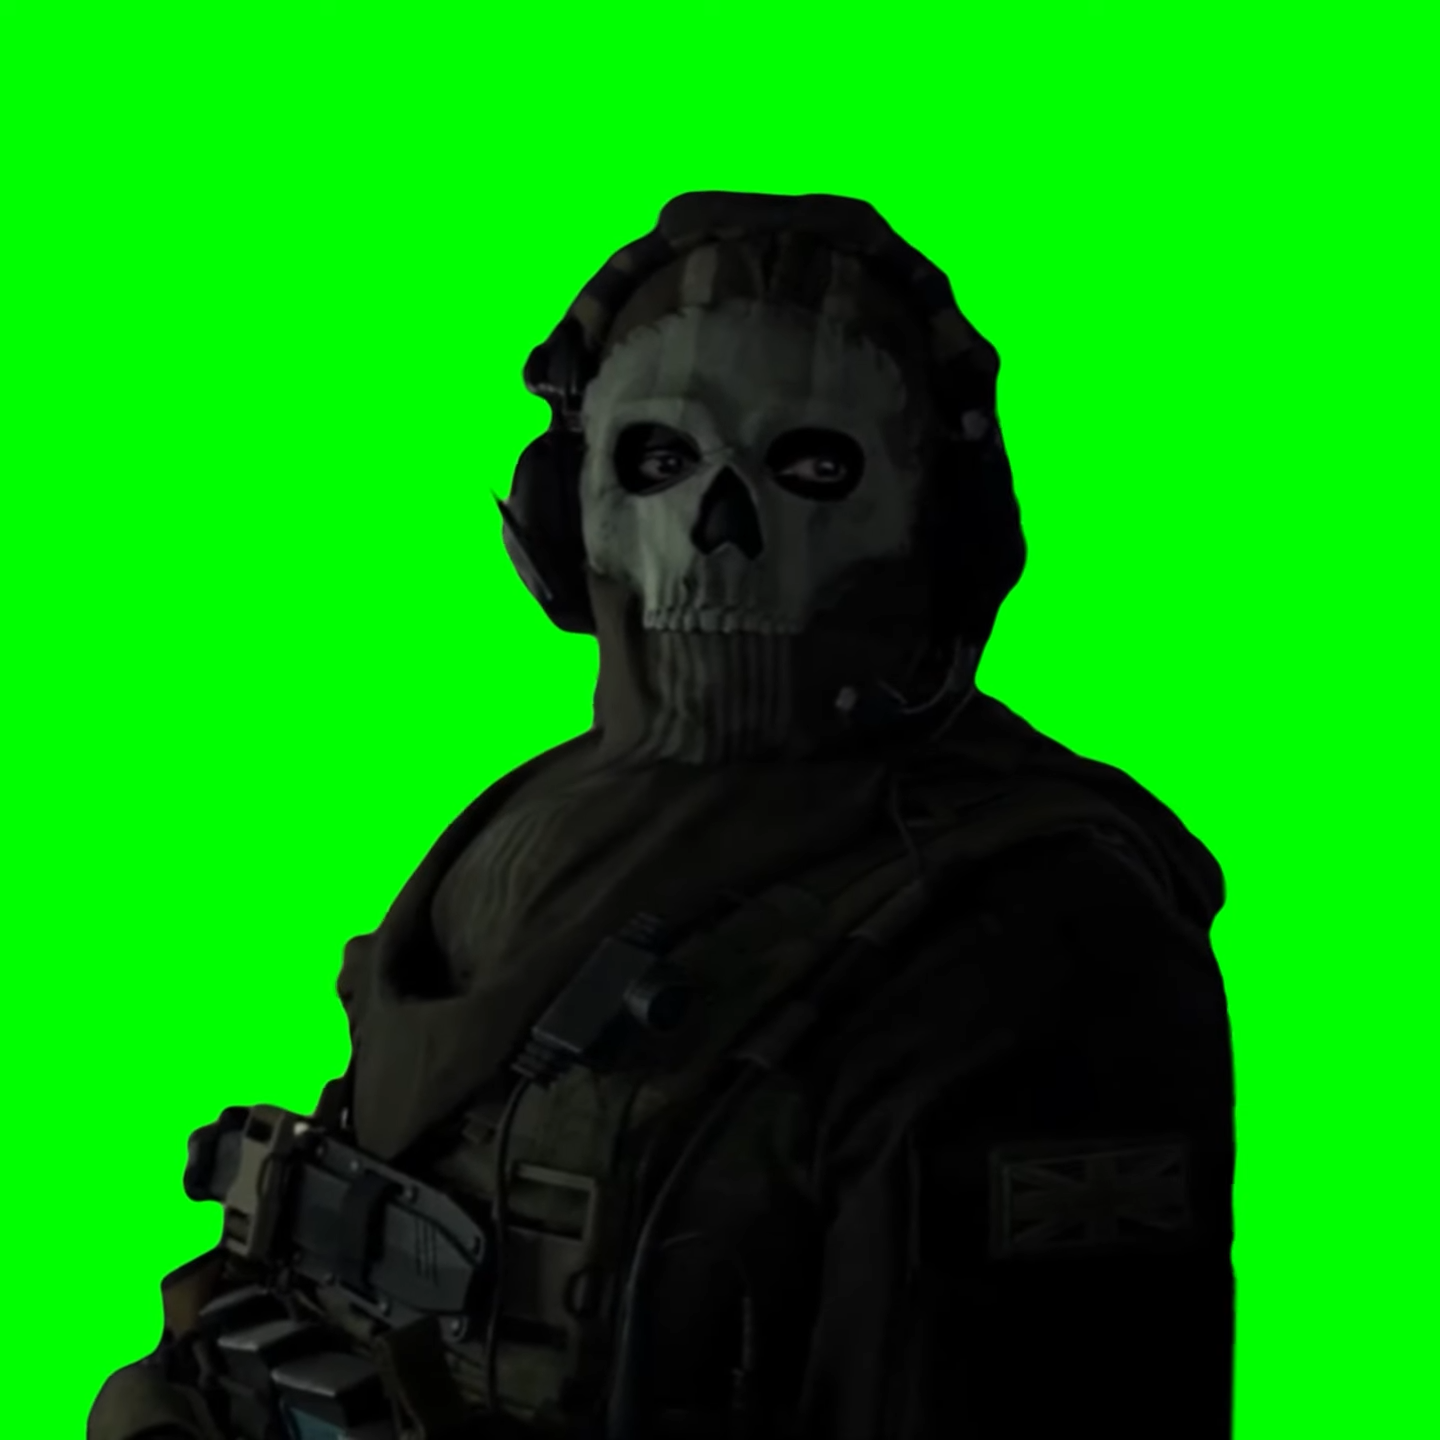 My Reaction to the Information, Ghost Staring / Ghost Gaze (MW2)